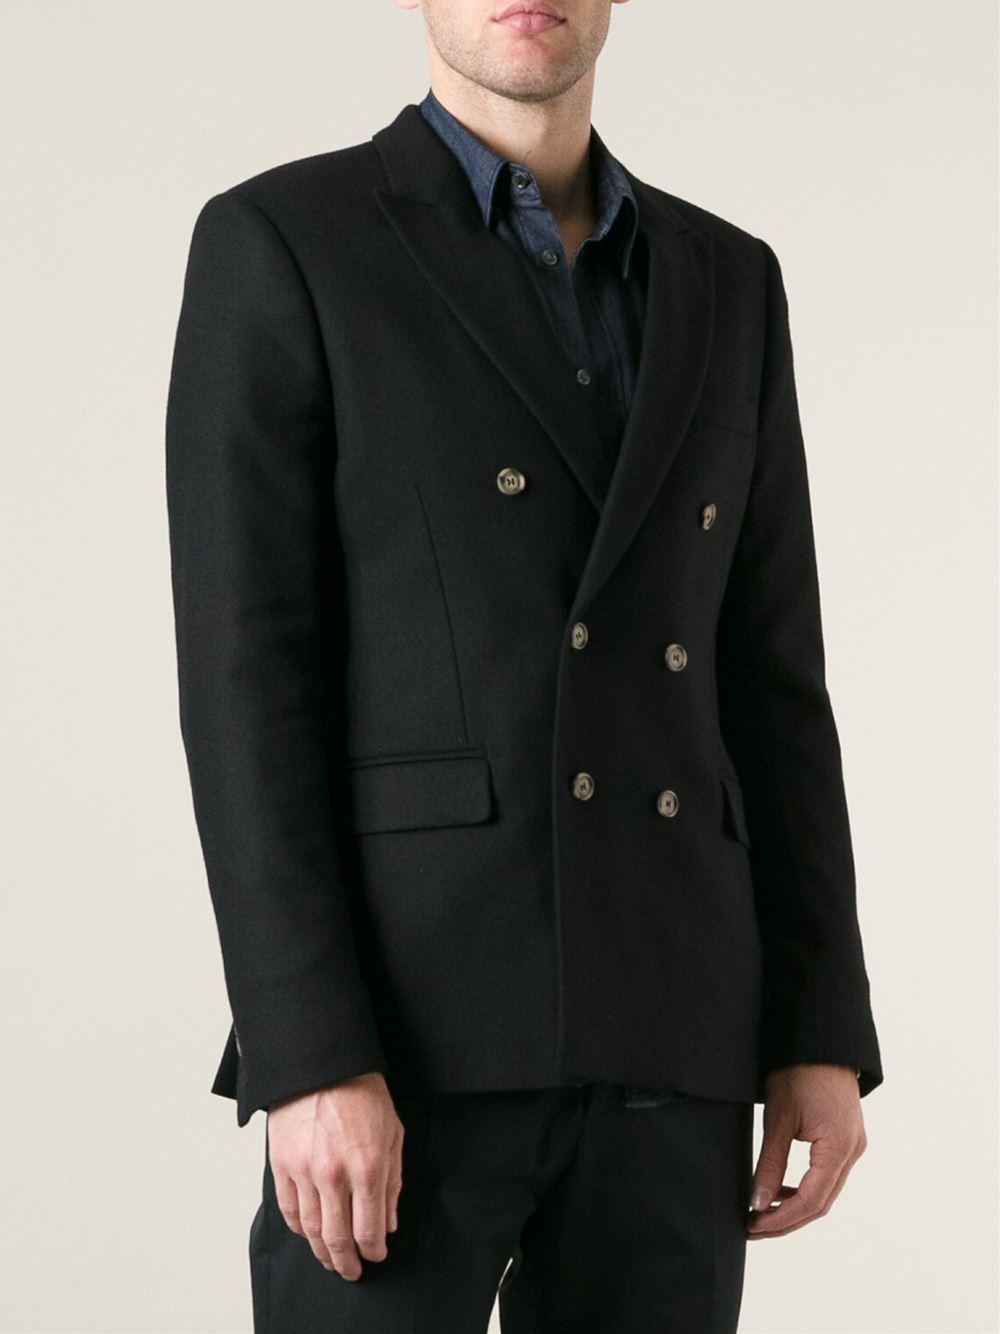 AMI Double Breasted Blazer in Black for Men - Lyst